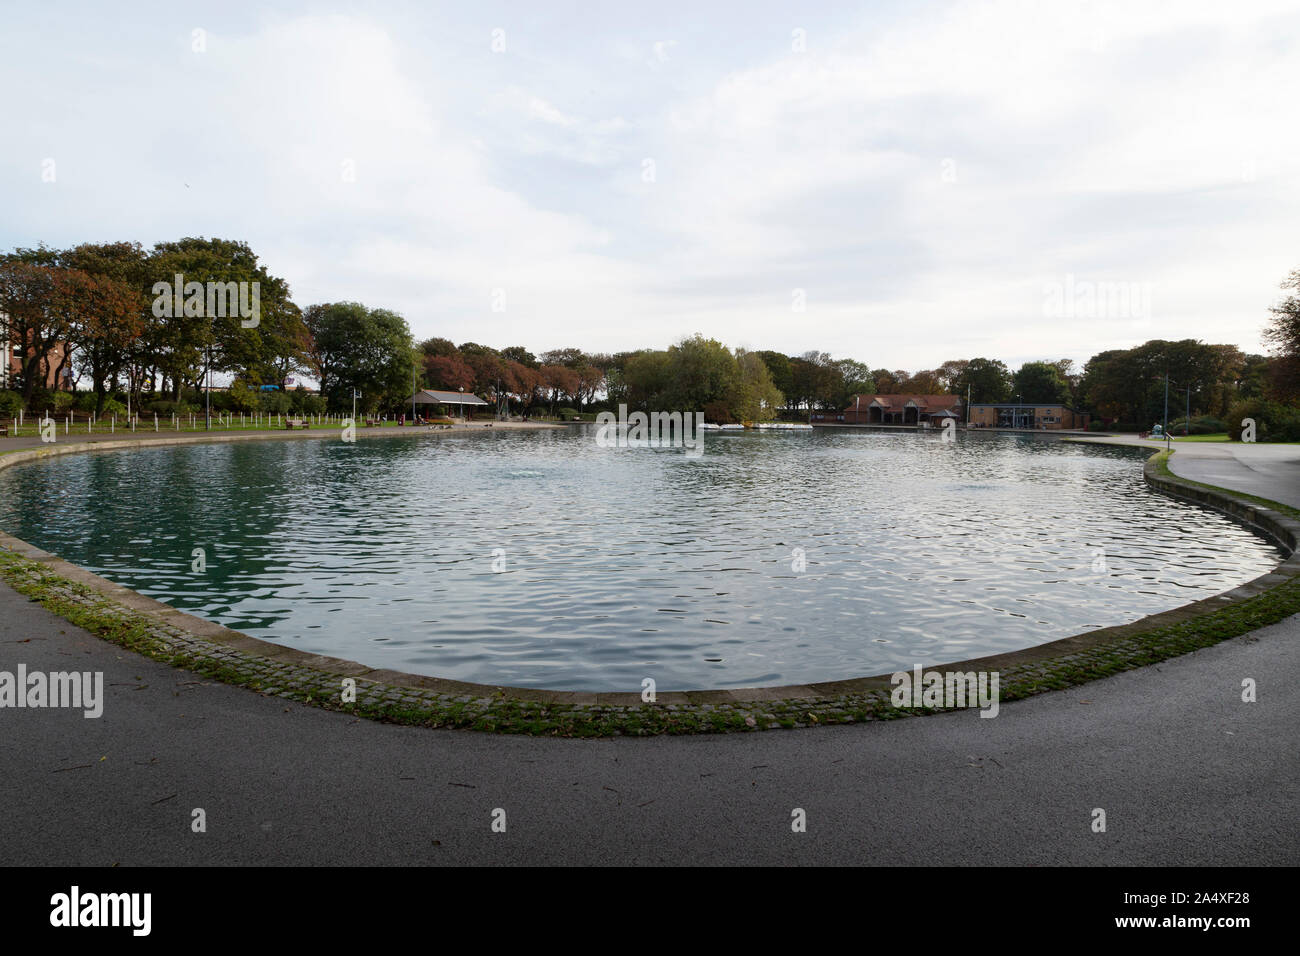 The boating lake at South Marine Park in South Shields, England. The park dates from the Victorian era. Stock Photo